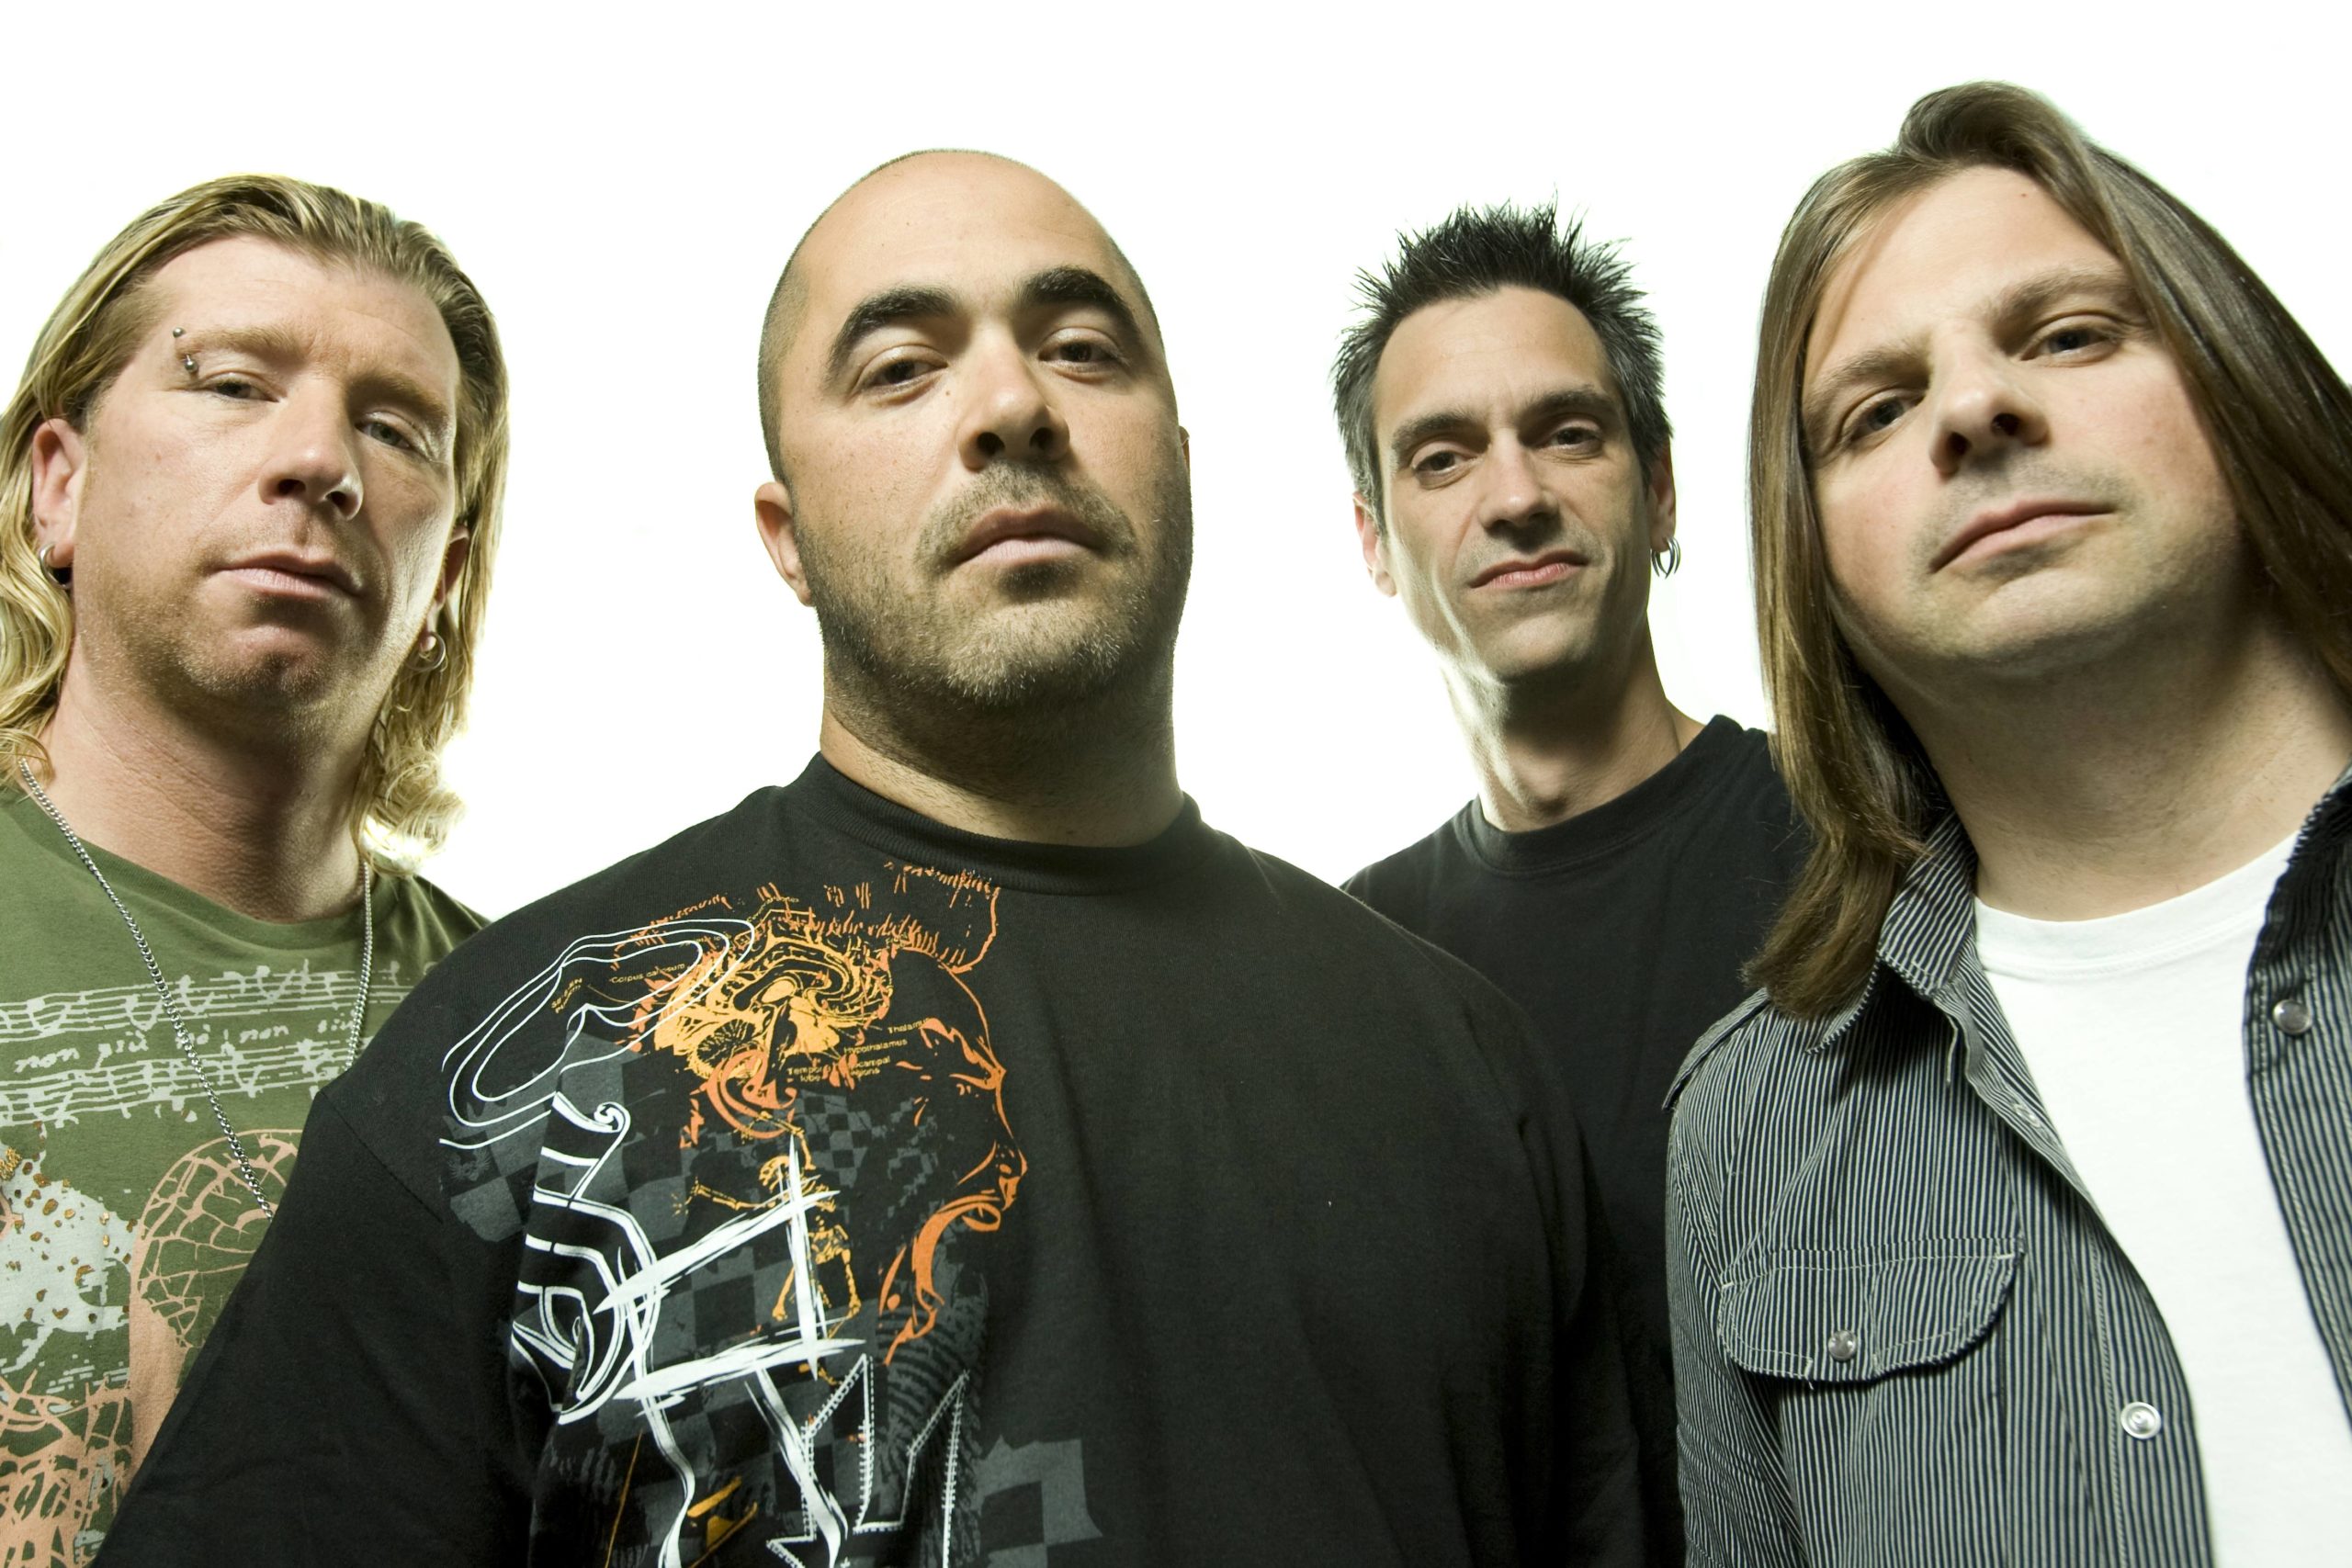 Posed studio group portrait of American rock band Staind. Left to right are Jon Wysocki, Aaron Lewis, Johnny April and Mike Mushok in New York on July 14 2008. (Photo by Nigel Crane/Redferns)